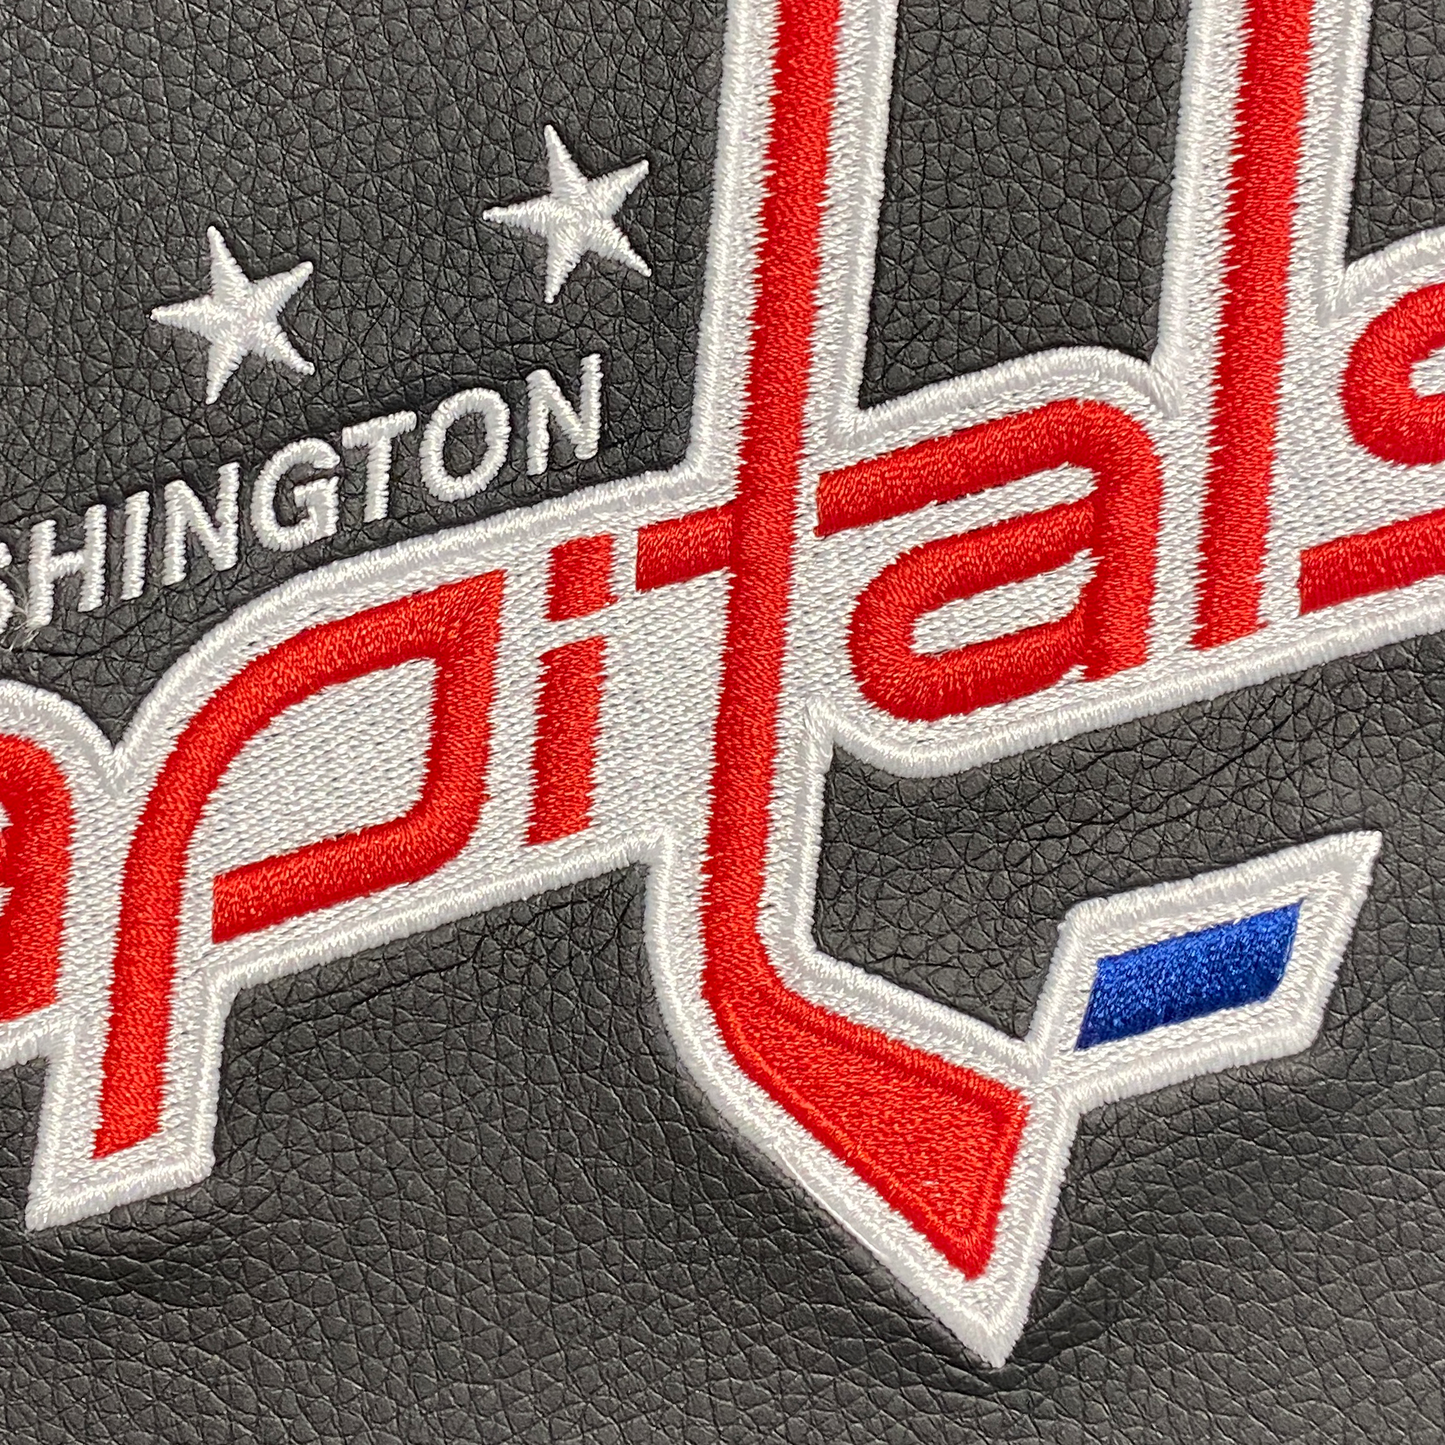 Stealth Power Plus Recliner with Washington Capitals Logo